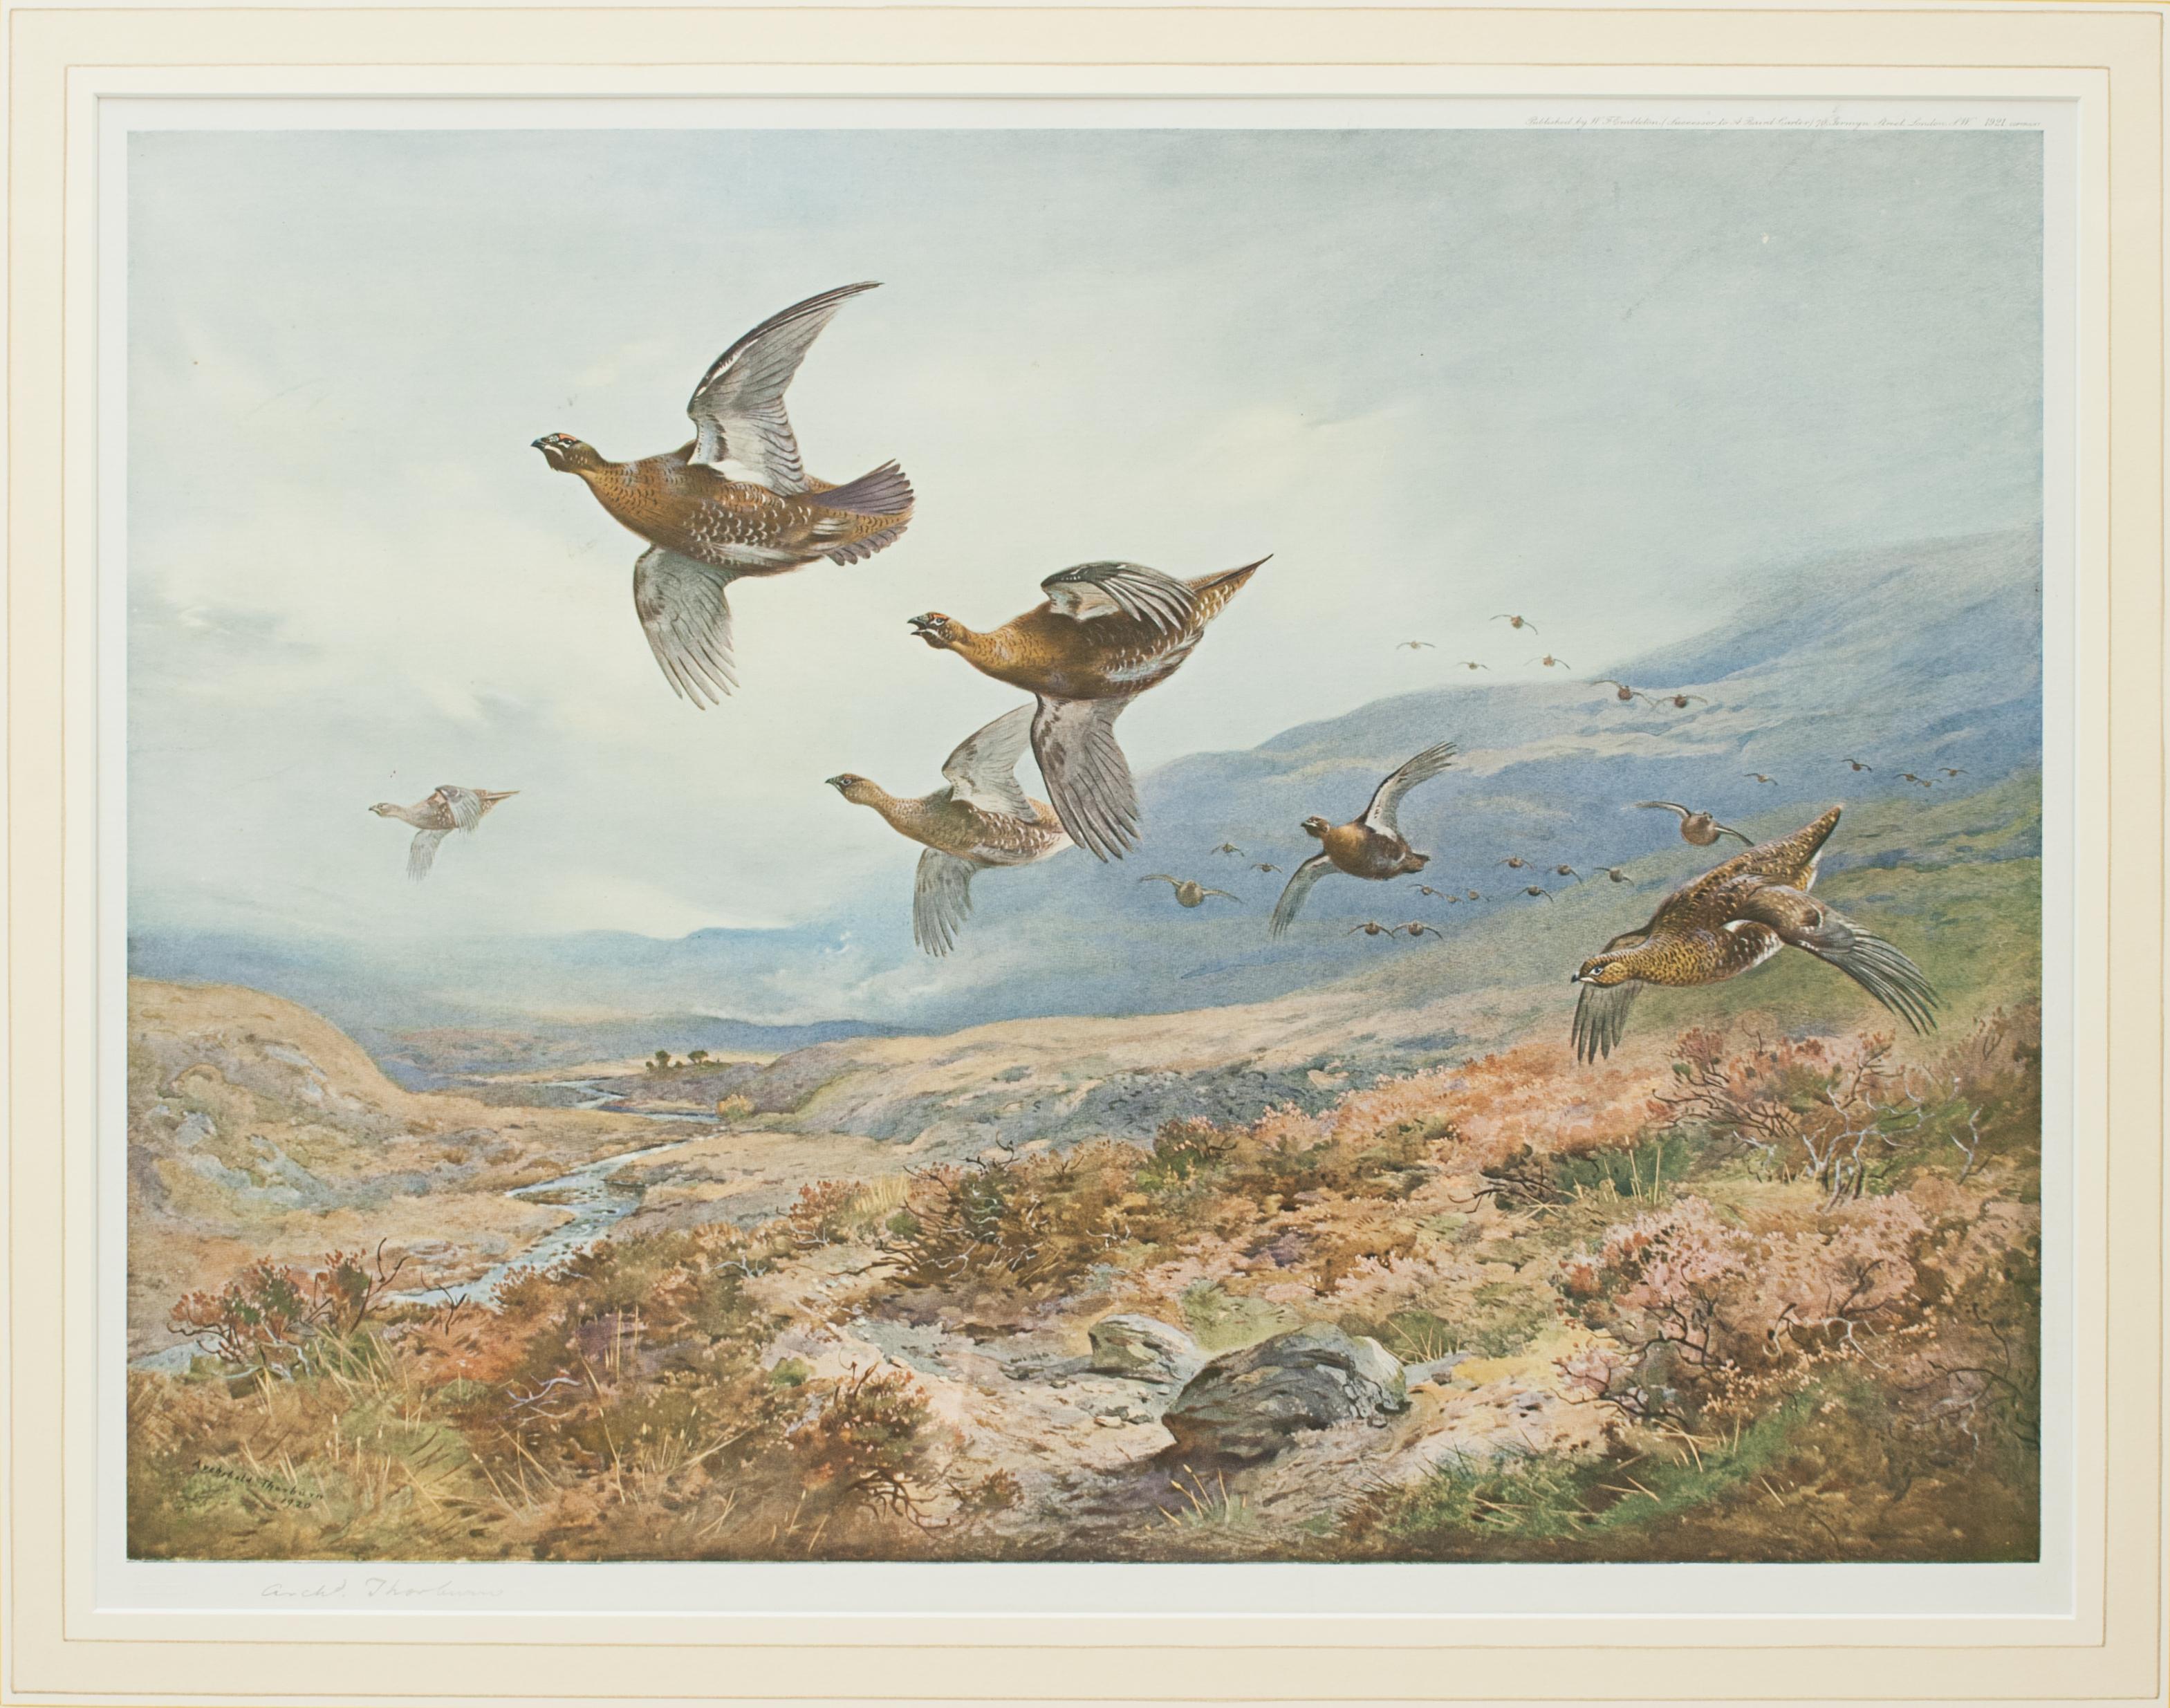 Sporting Art Antique Shooting Picture, Grouse Over the Moors by Archibald Thorburn